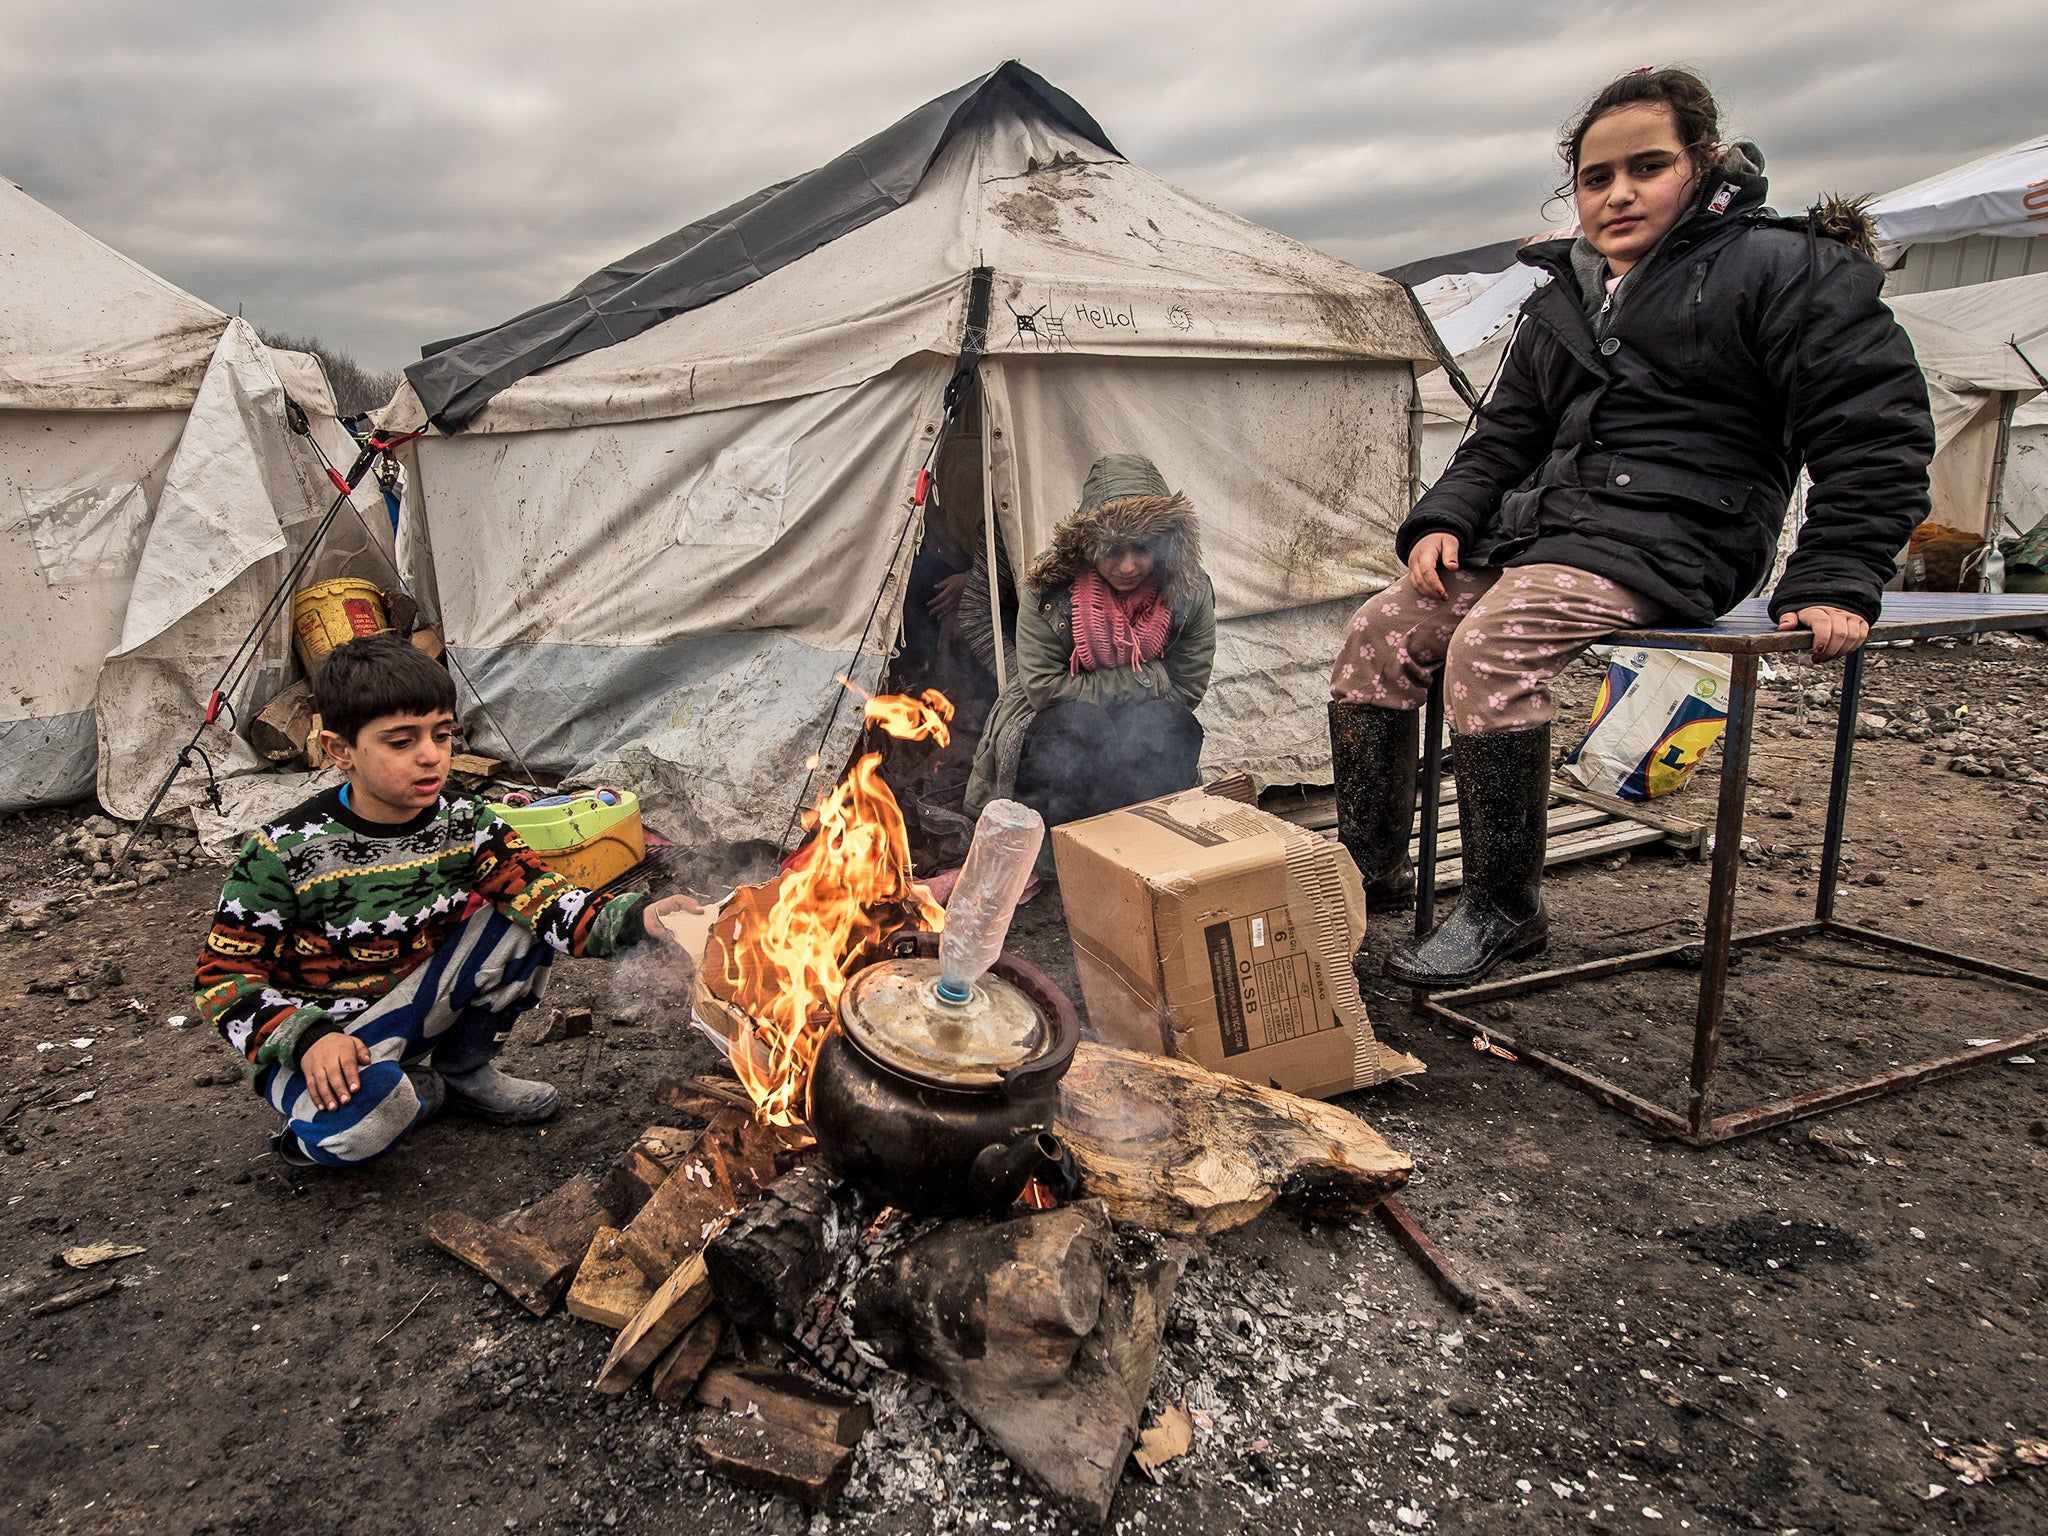 Young refugees try to keep warm at a refugee camp near Calais on Wednesday